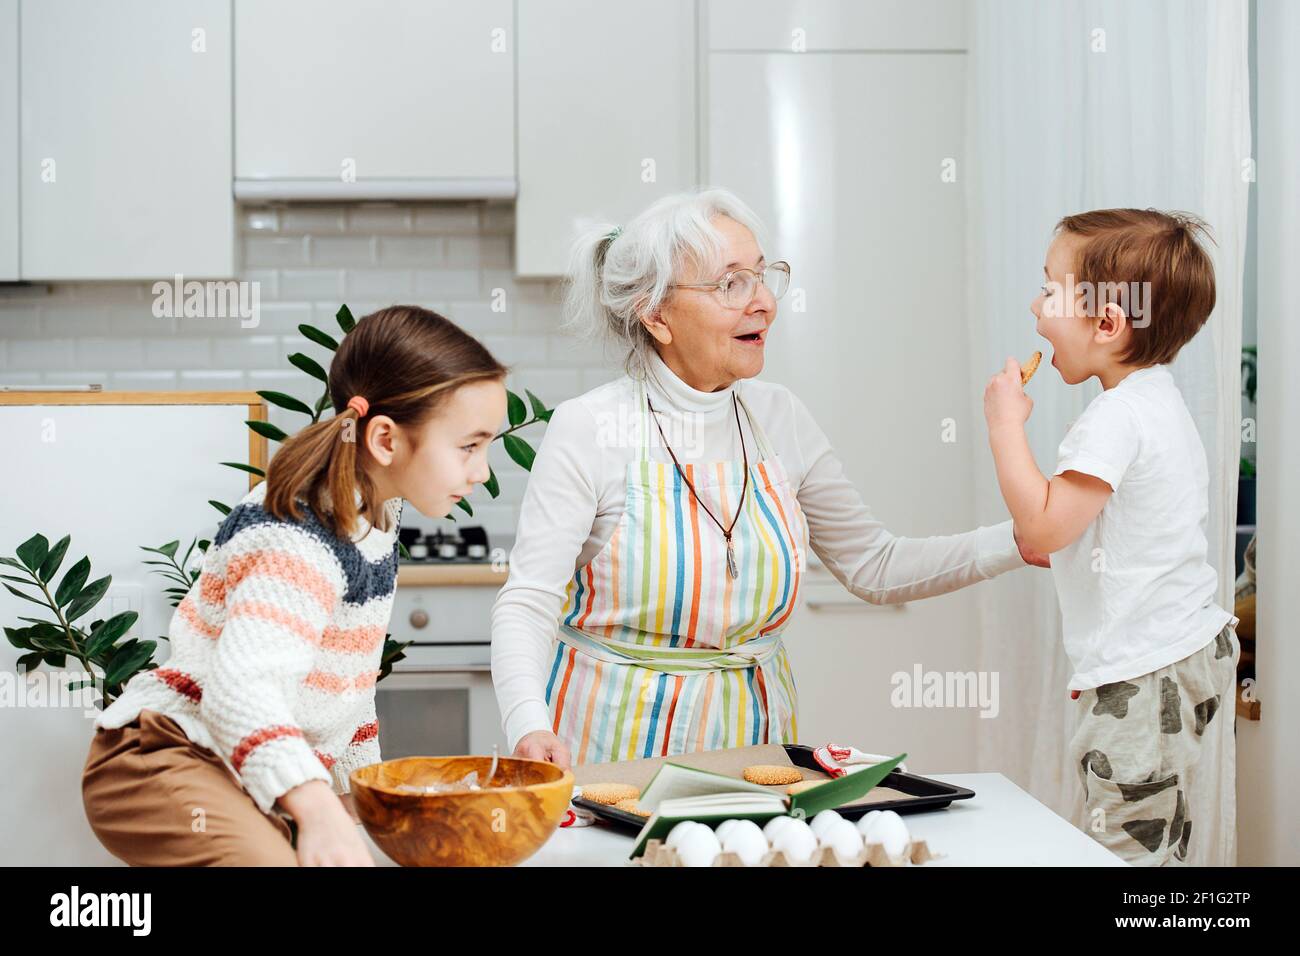 Siblings visiting their grandmother, they make cook together. The boy says he's hungry Stock Photo